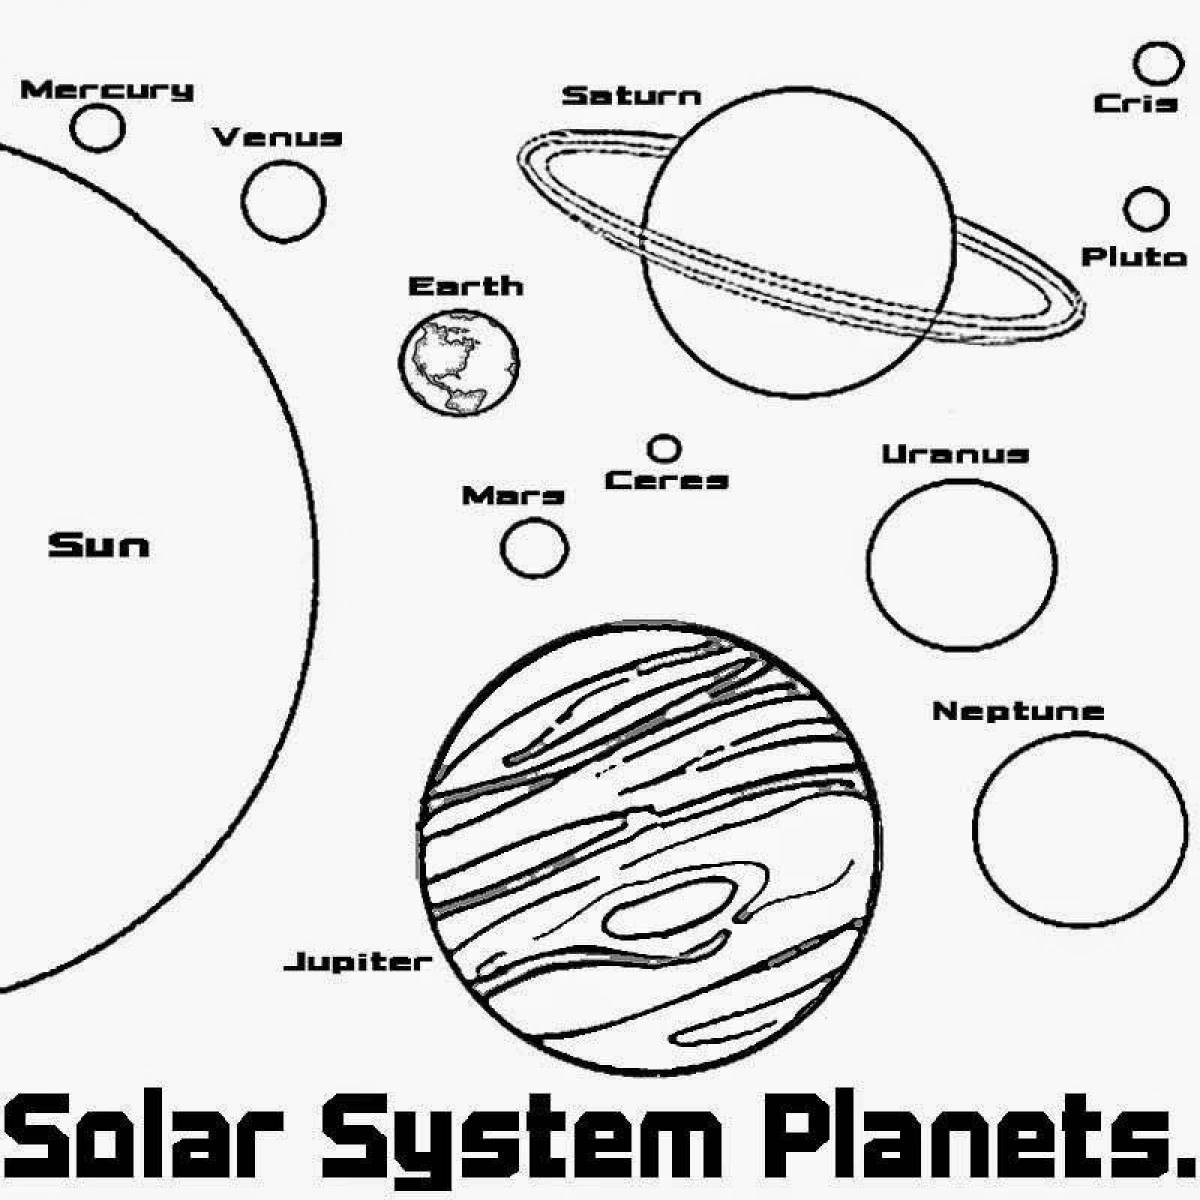 An interesting coloring book for kids in the planets of the solar system